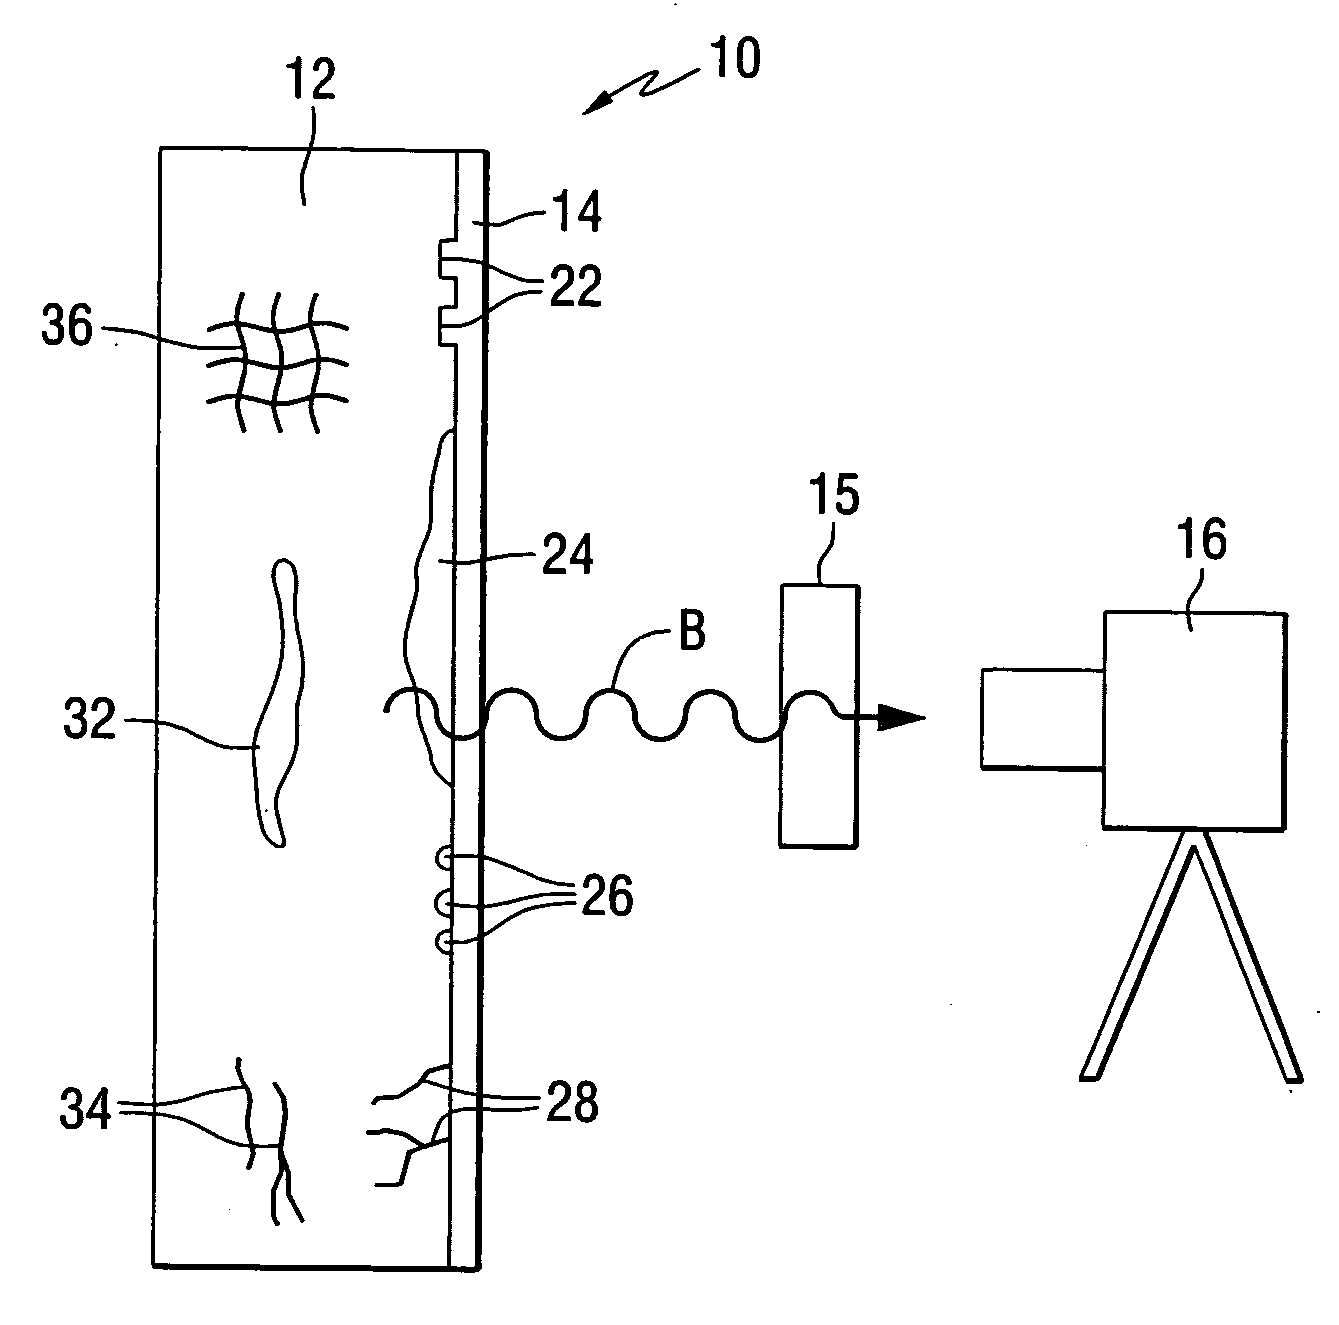 Spectral filter system for infrared imaging of substrates through coatings